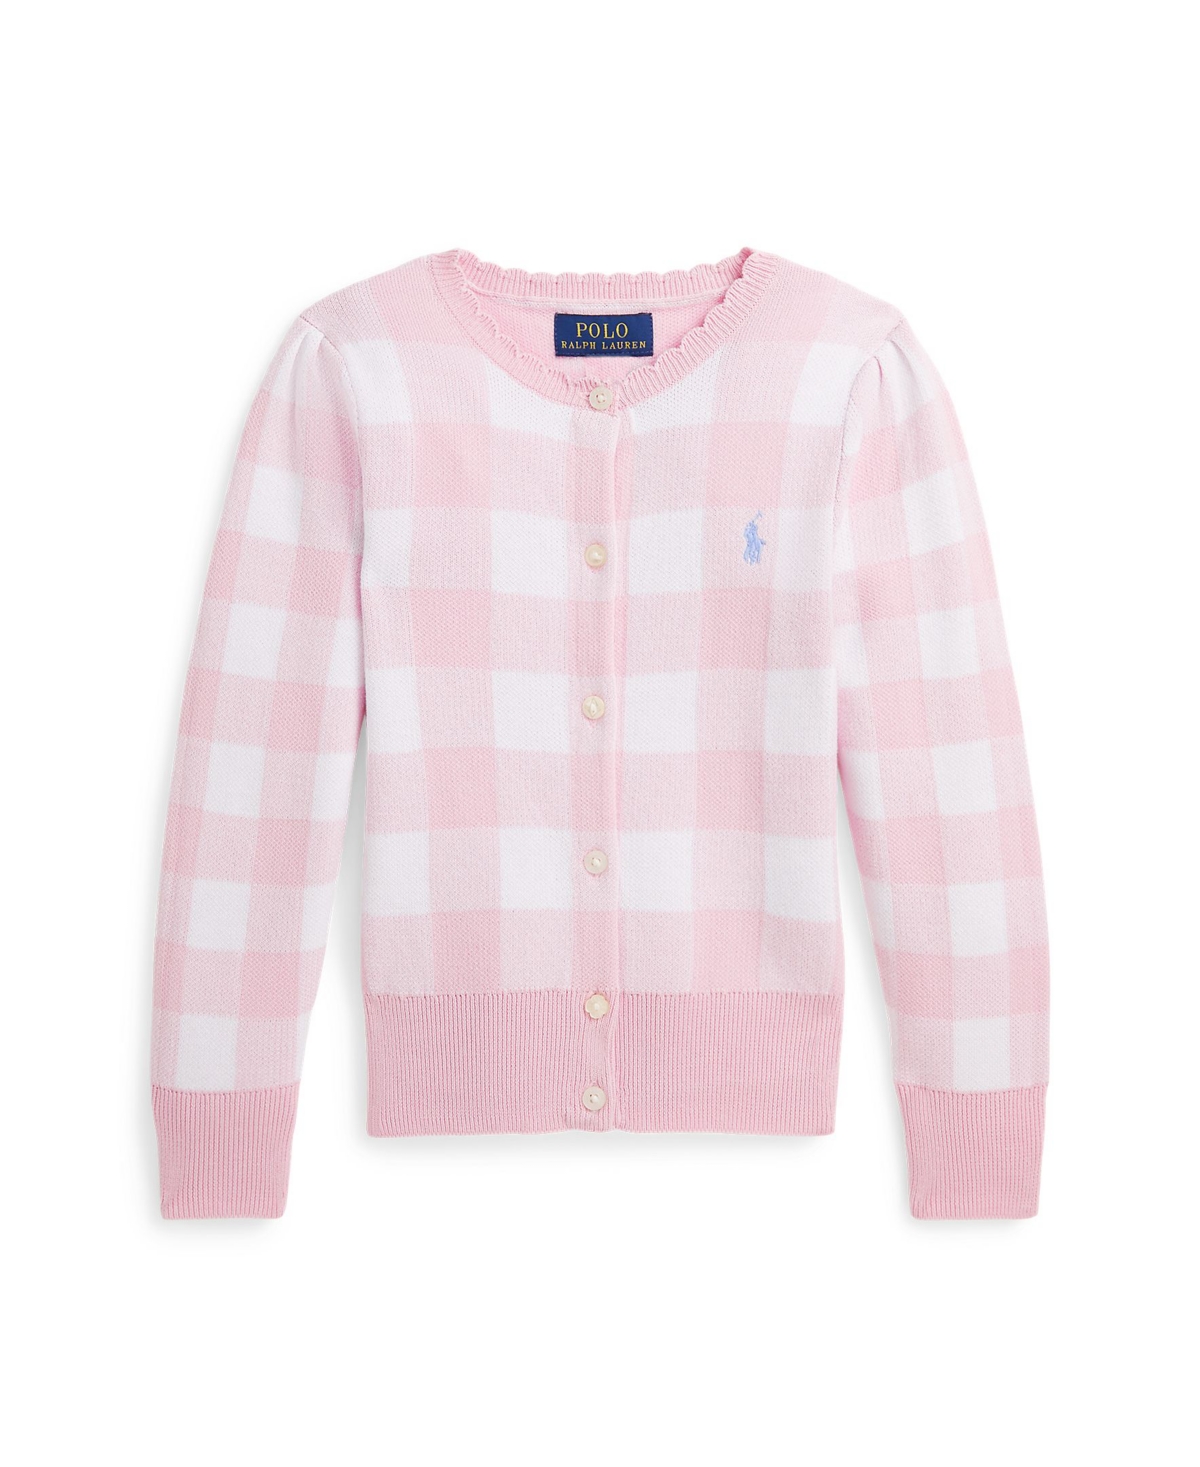 Polo Ralph Lauren Kids' Toddler And Little Girls Gingham Cotton Cardigan Sweater In Pink Multi With Blue Hyacinth